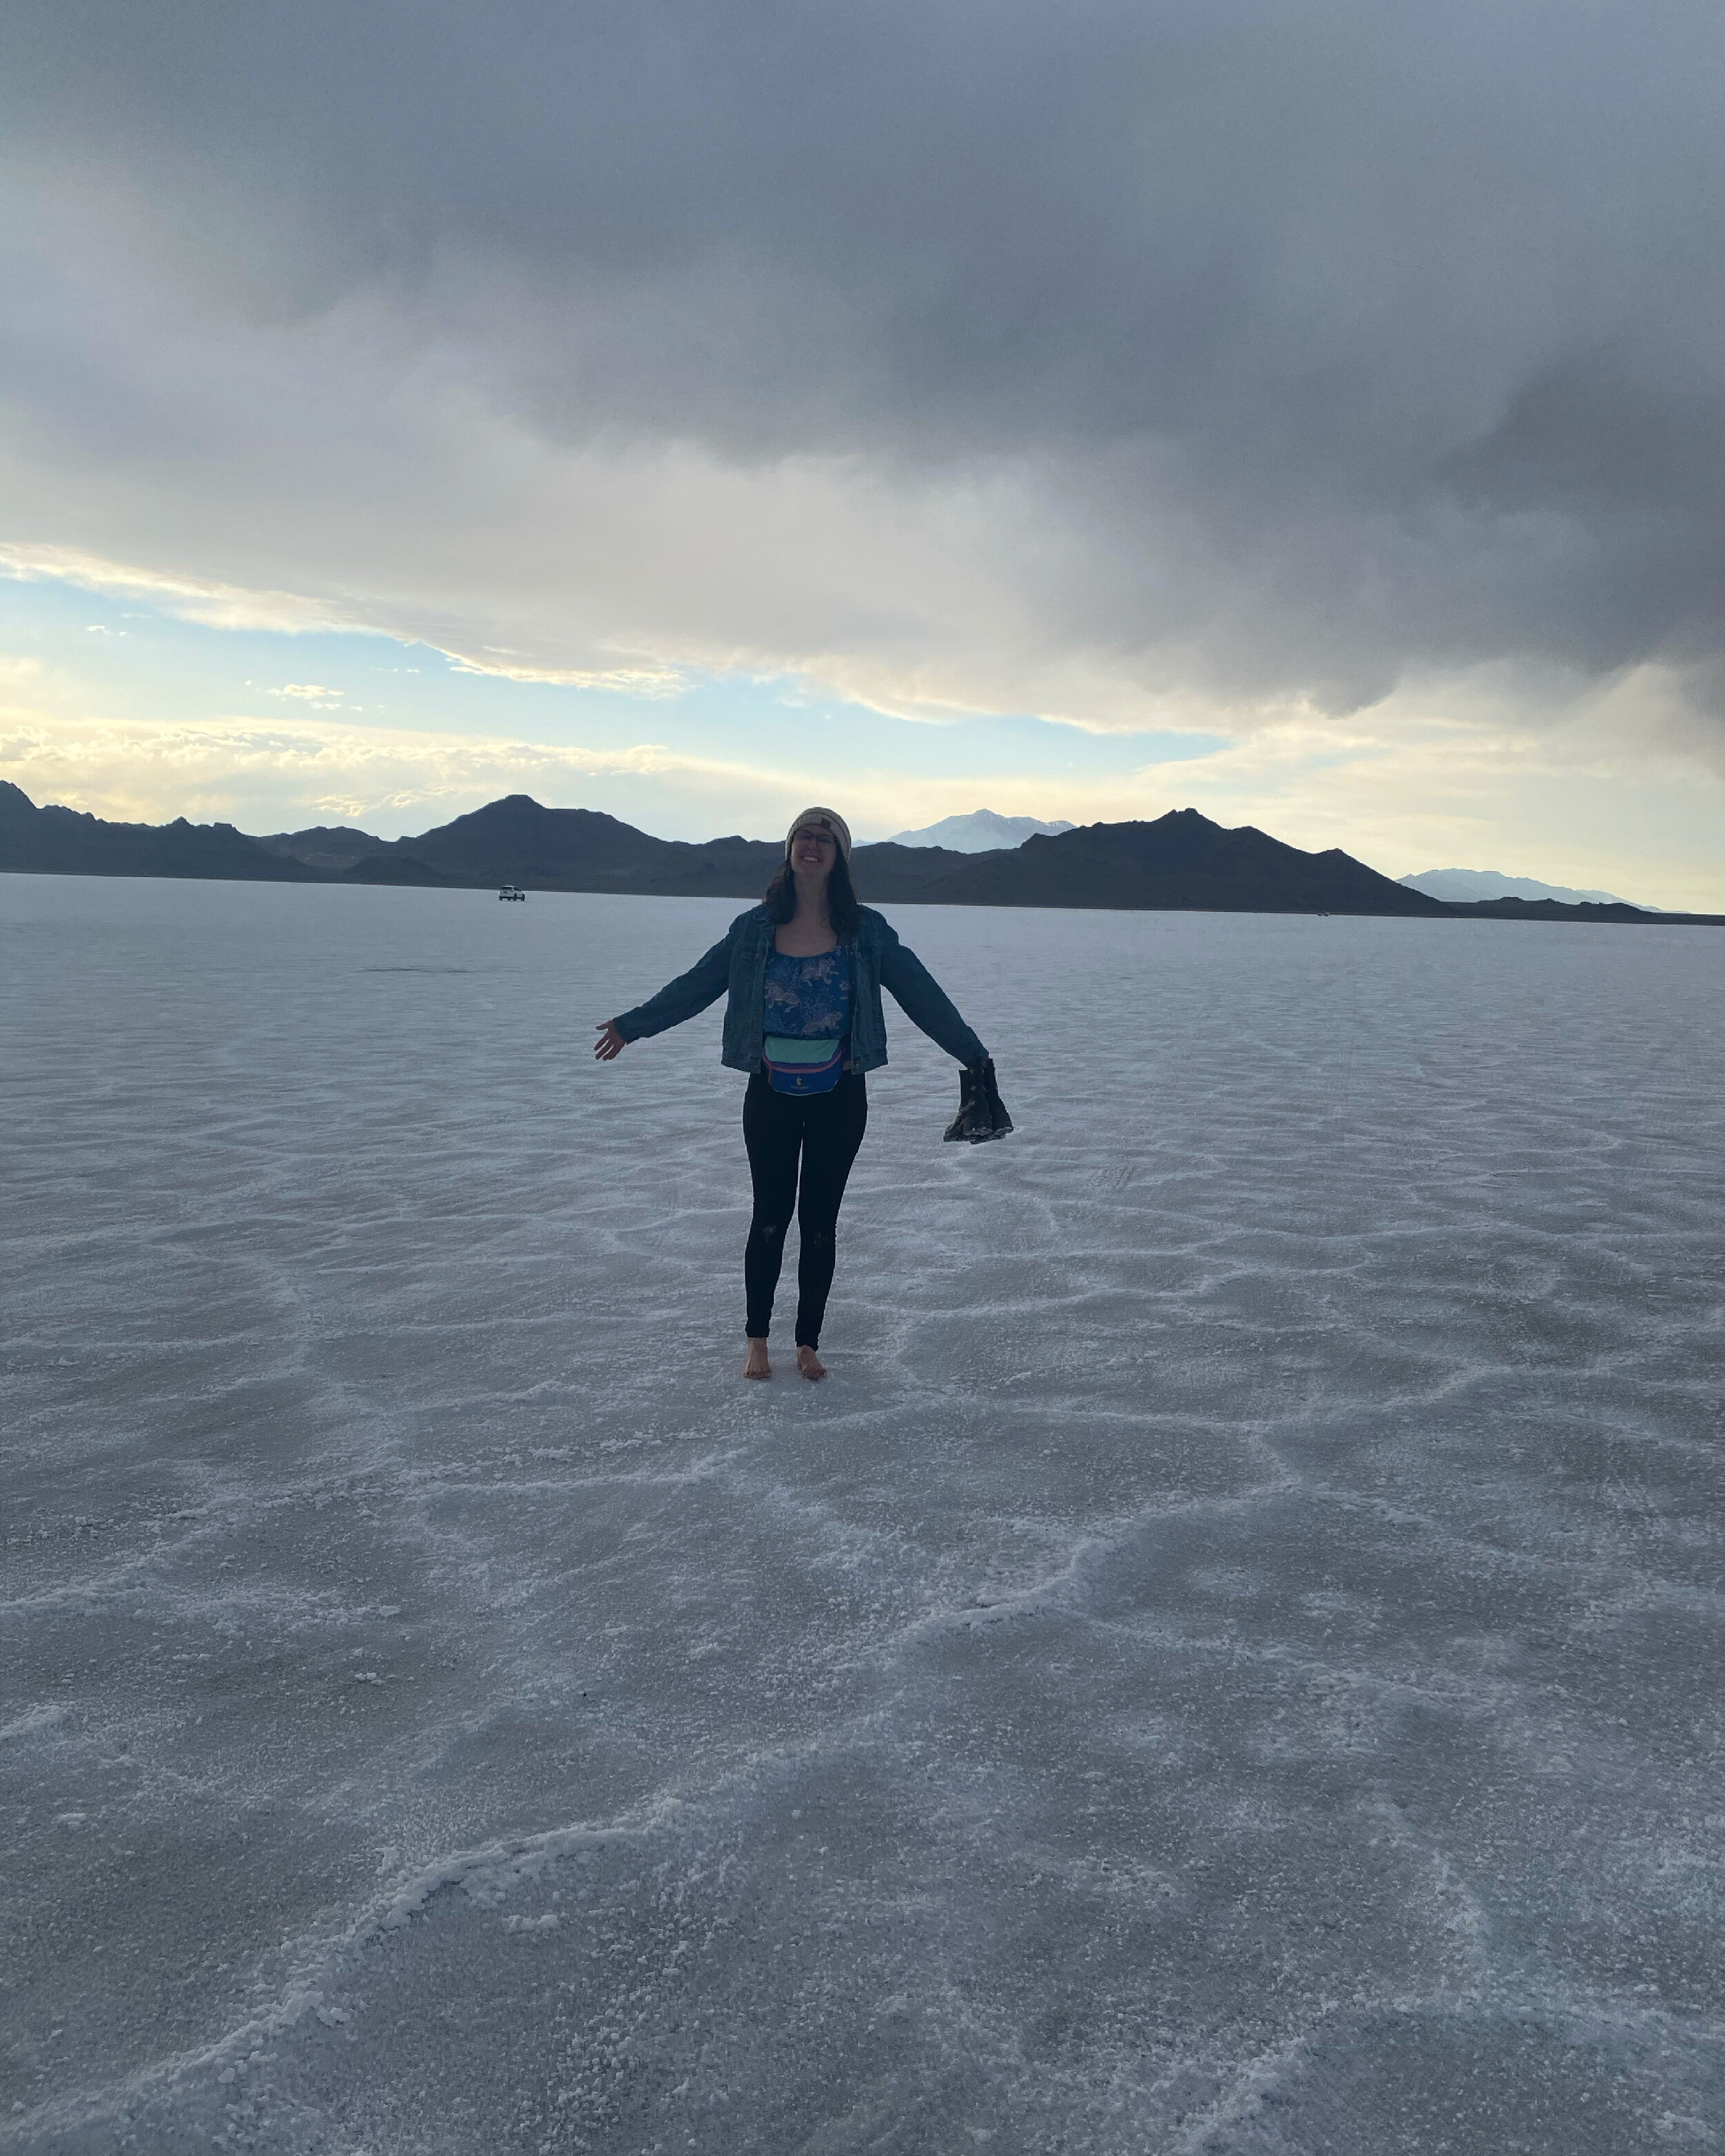 Salt flats on the side of the highway in Utah, highly recommend!